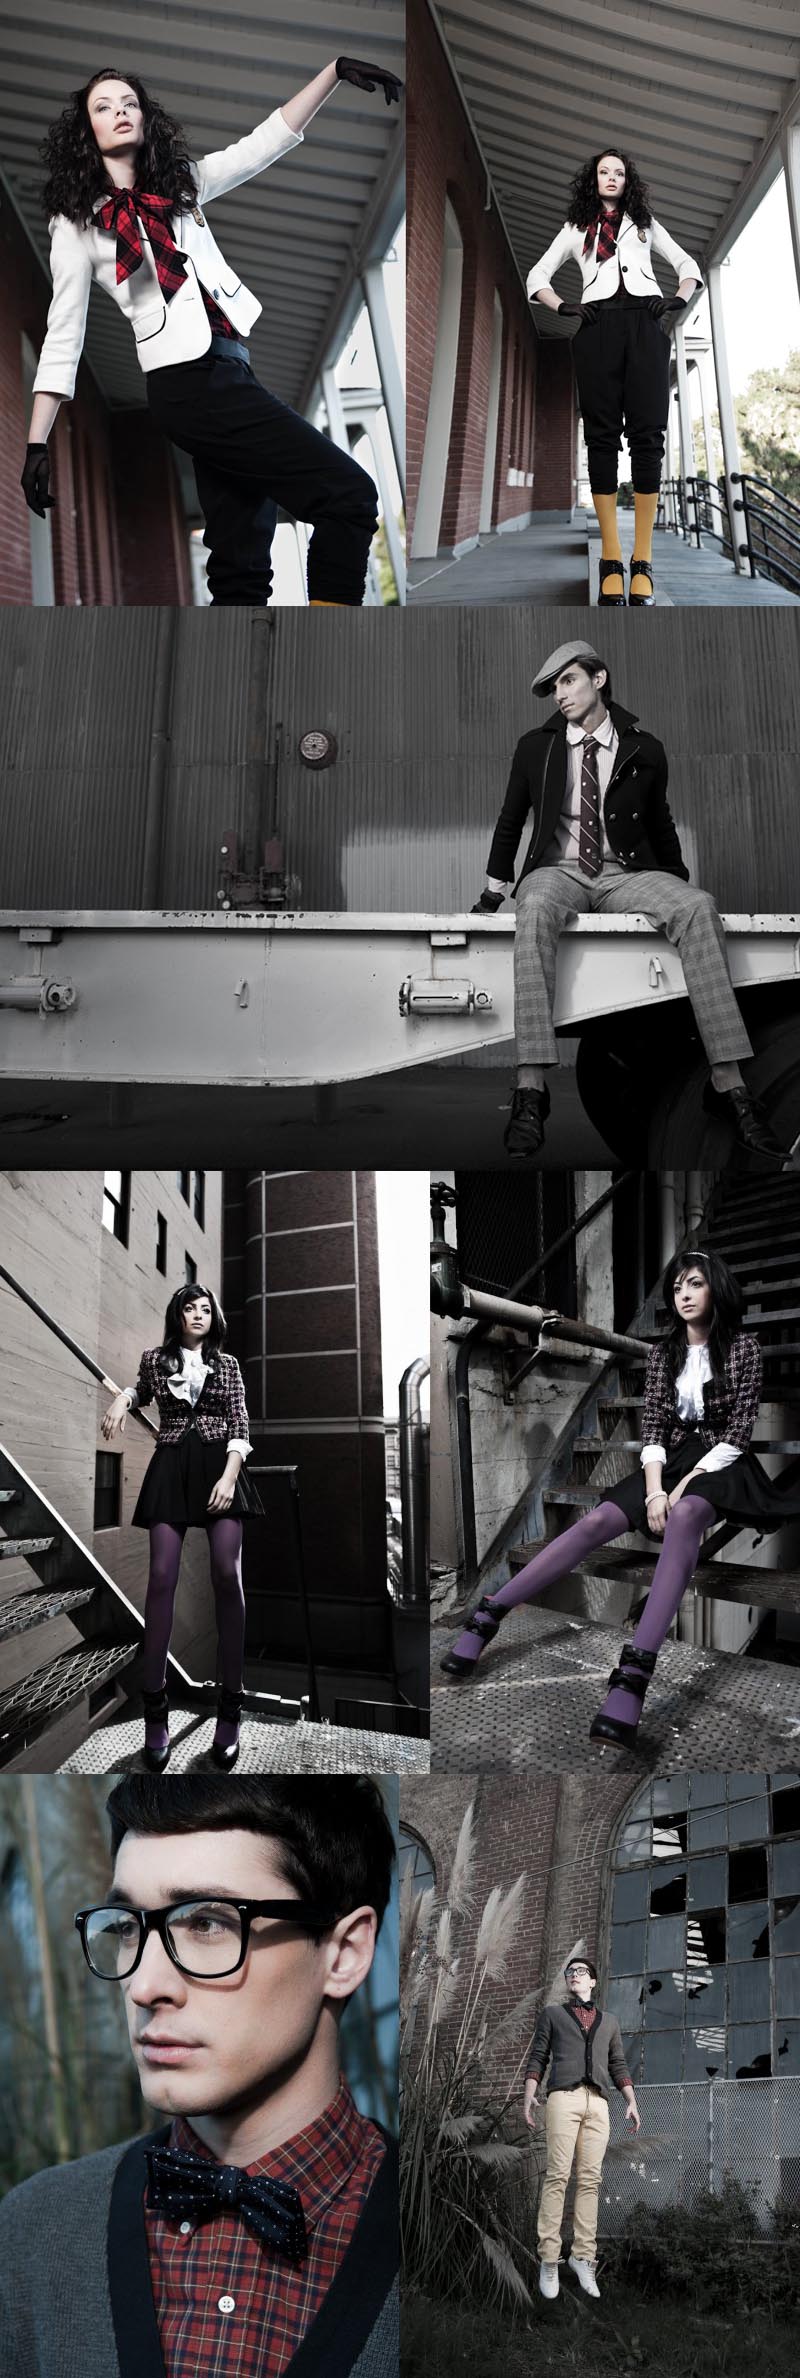 Female and Male model photo shoot of MicheStyle, Brooke Alyse, lal670 and lujani by Yifei